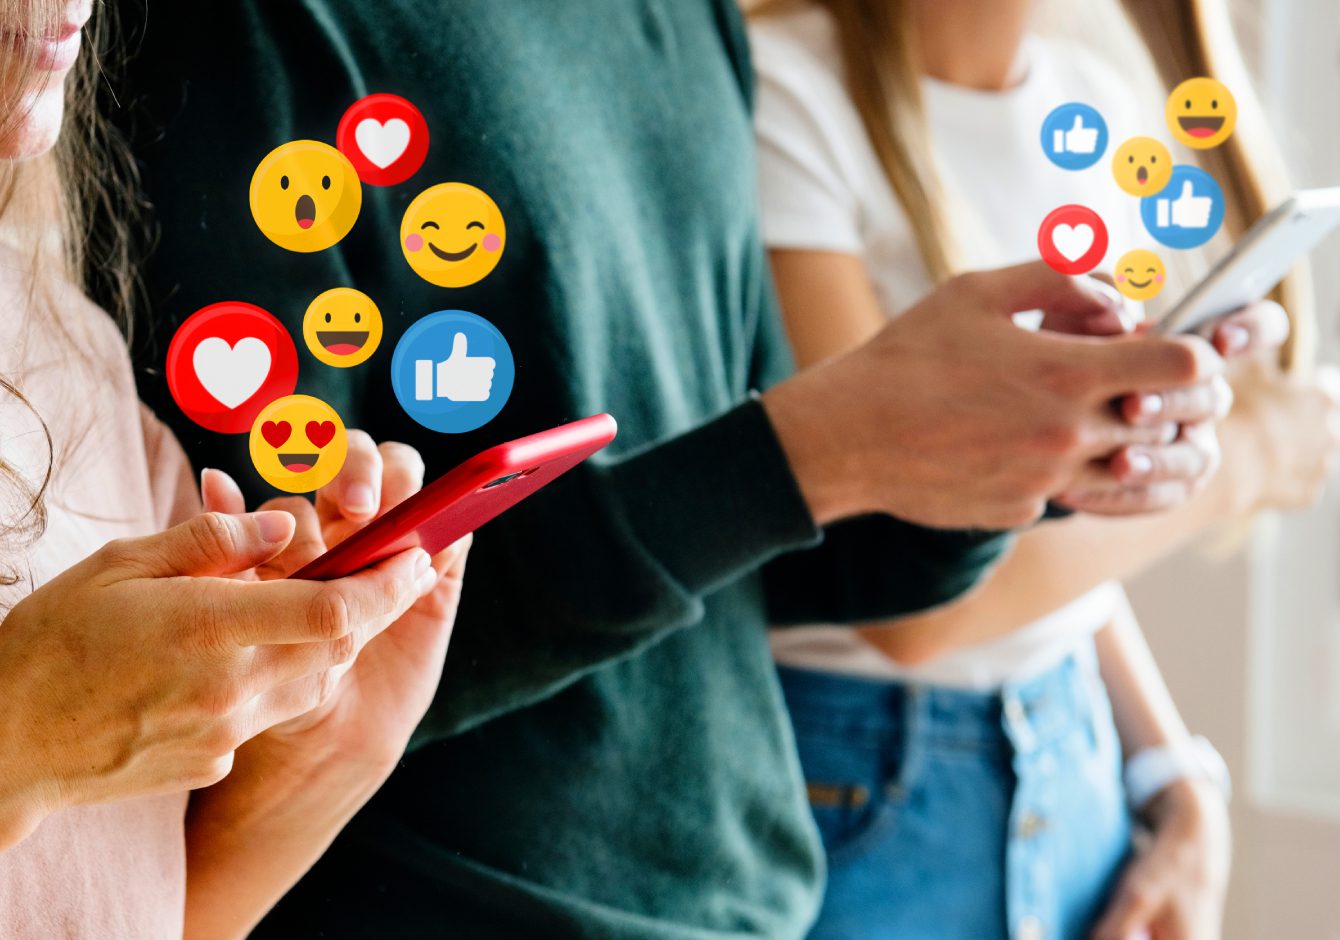 People using smartphones with social media emoji reactions coming out of screen